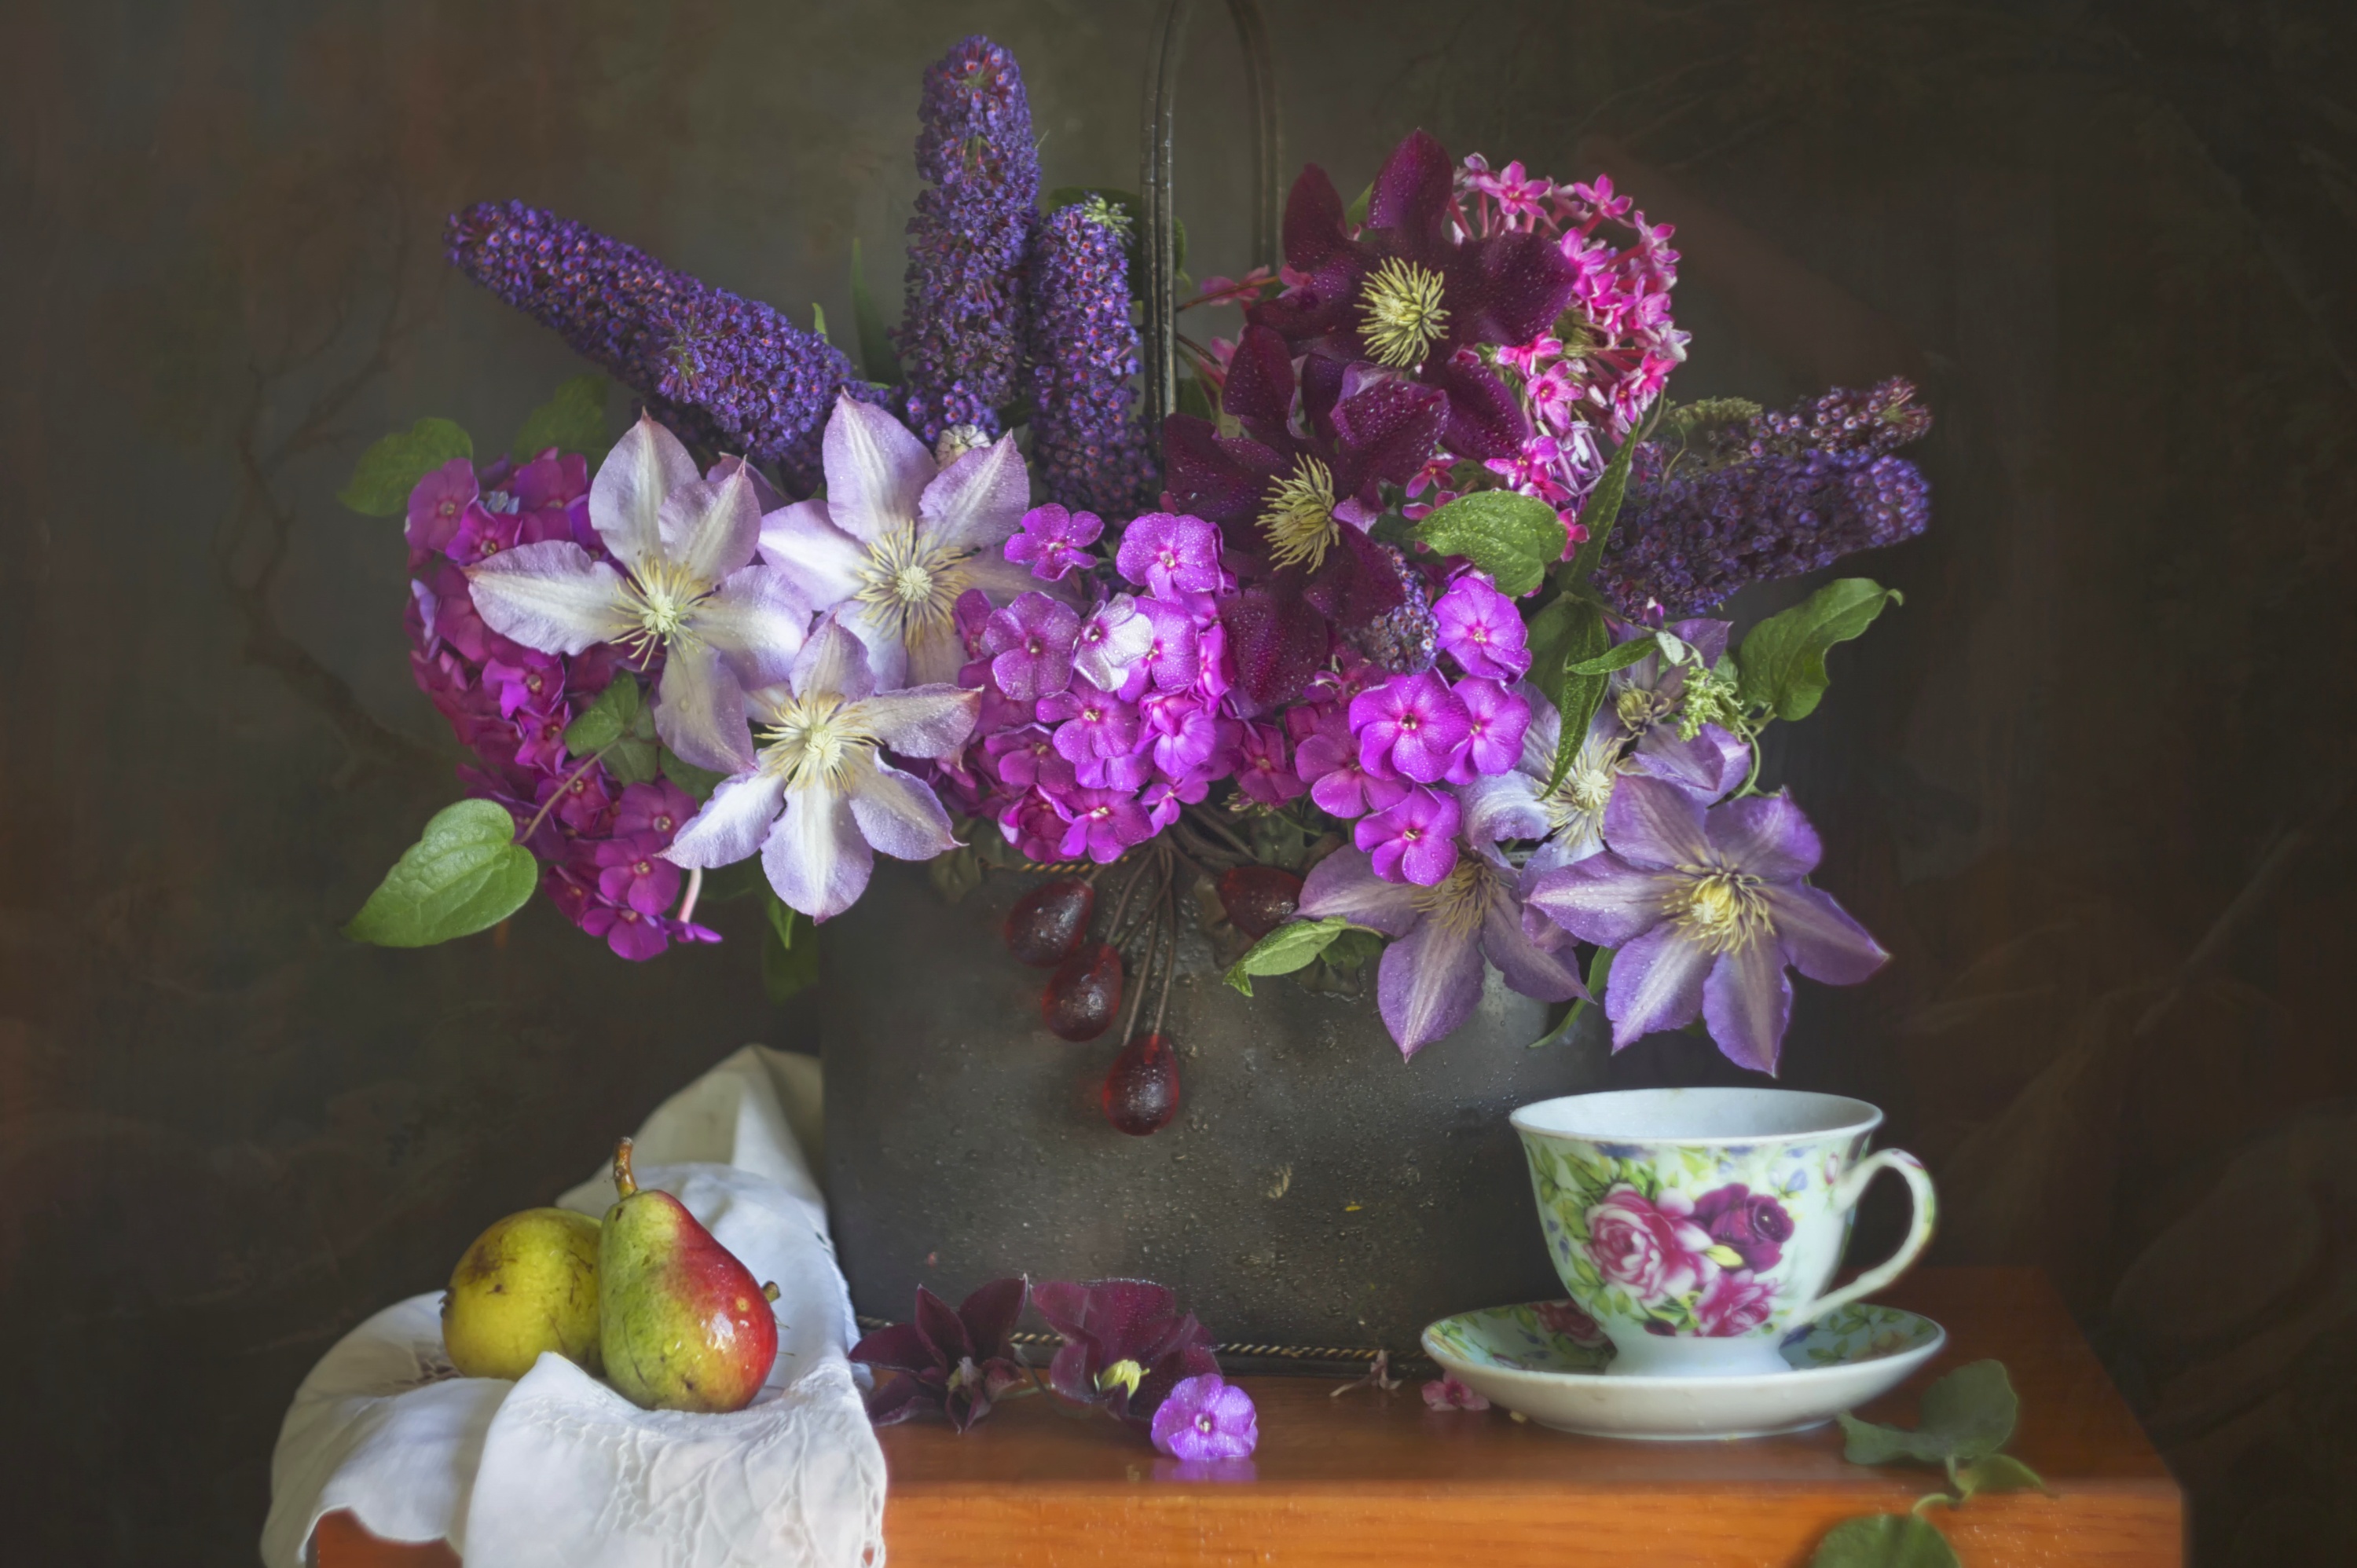 photography, still life, bouquet, clematis, cup, flower, pear, phlox